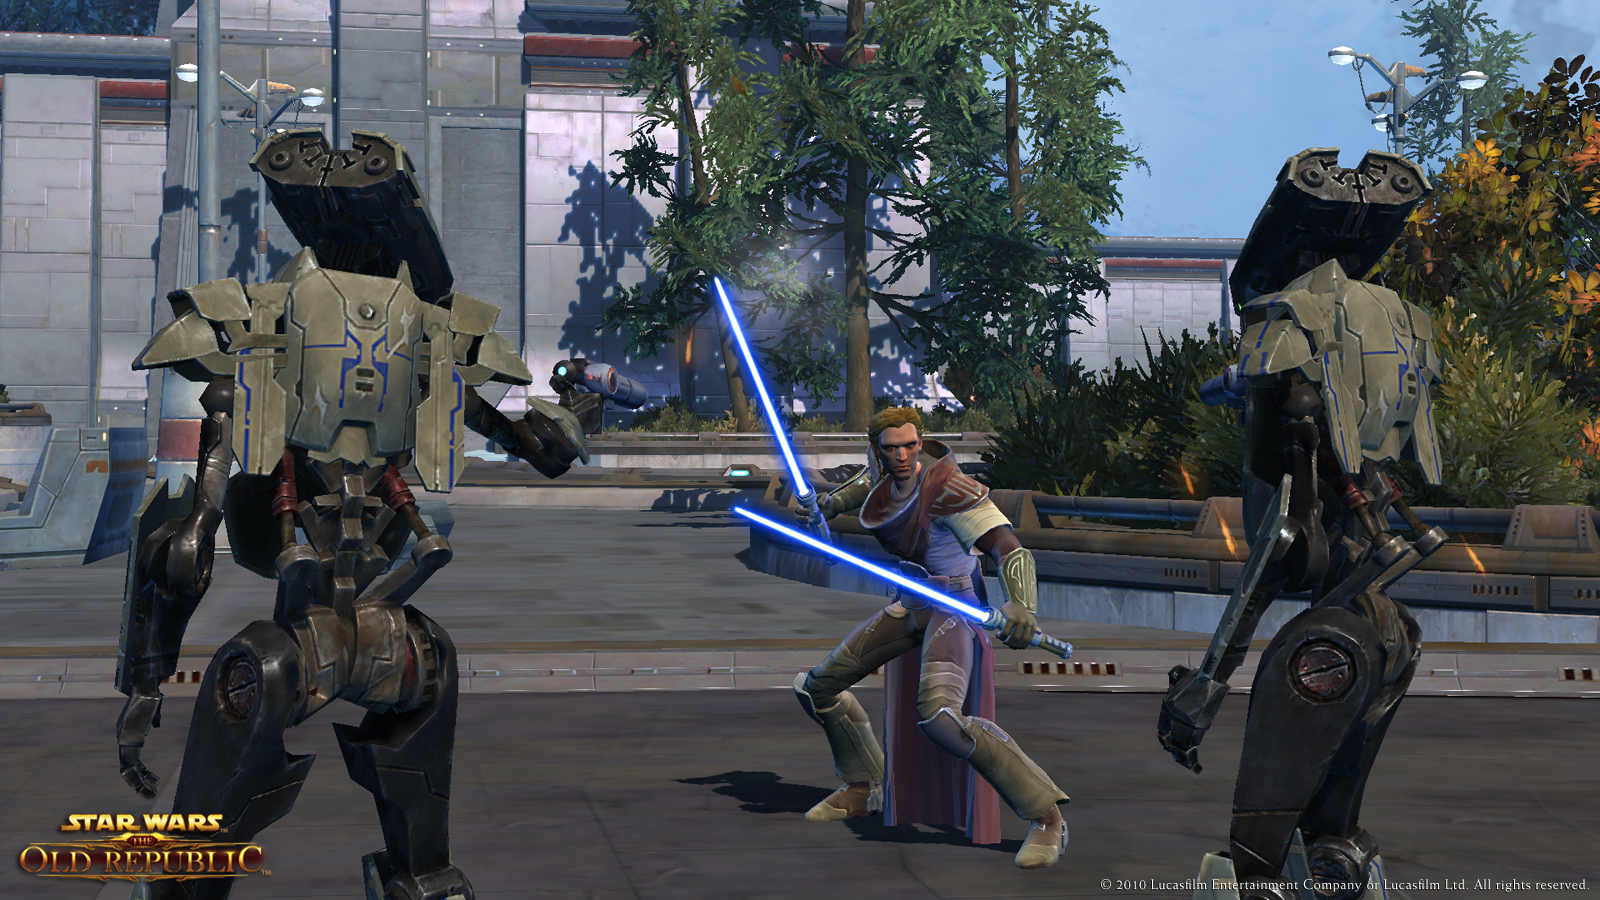 Star Wars: The Old Republic Early Access Begins Today